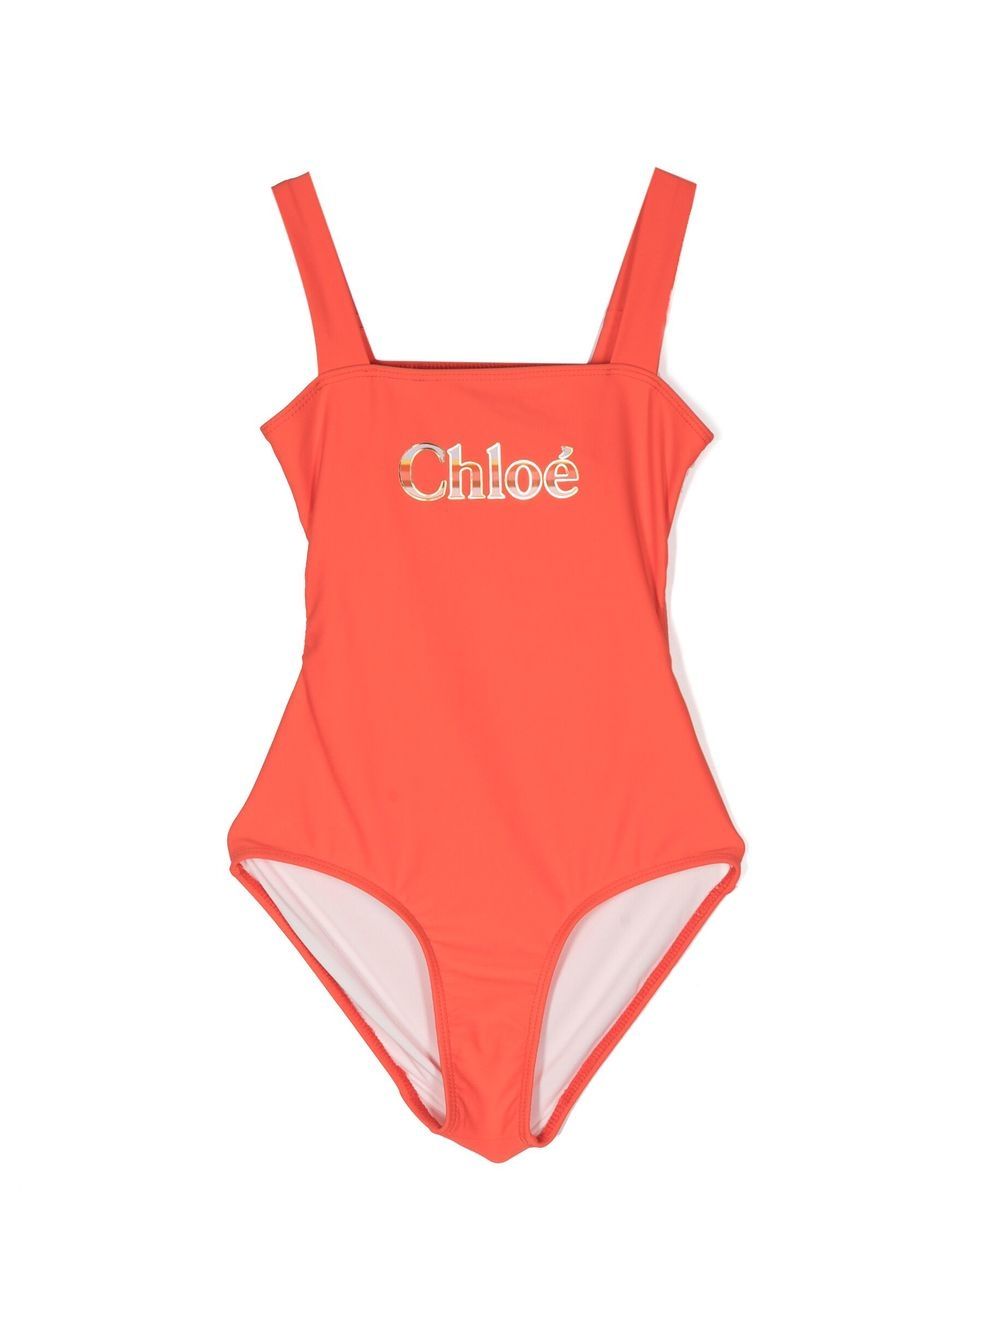 Chloé Kids' Recycled Lycra One Piece Swimsuit In Red